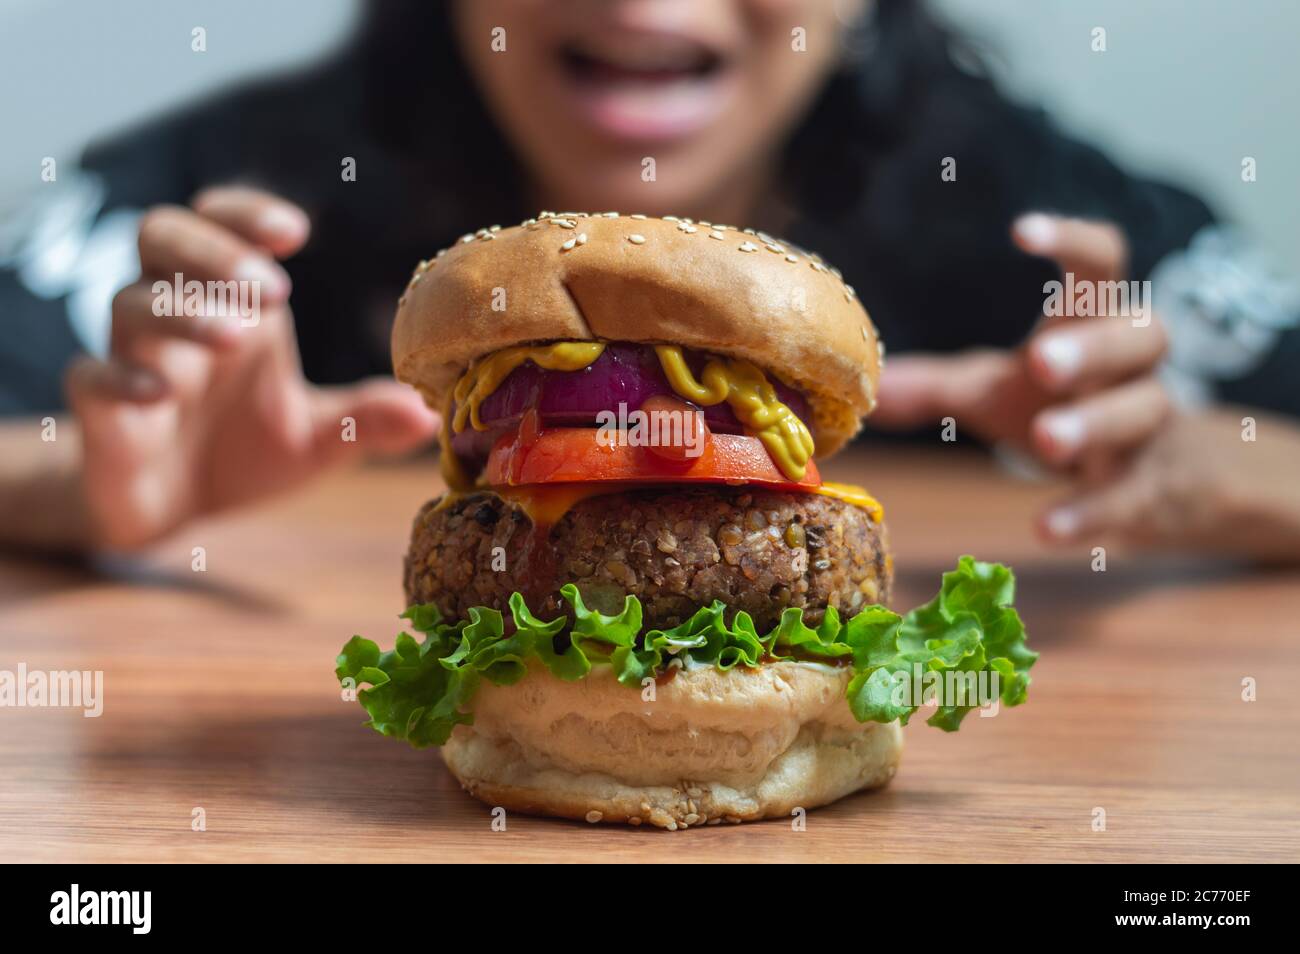 Pretty Mexican girl staring in surprise and grabbing at large vegetarian burger made of beans and lentils Stock Photo